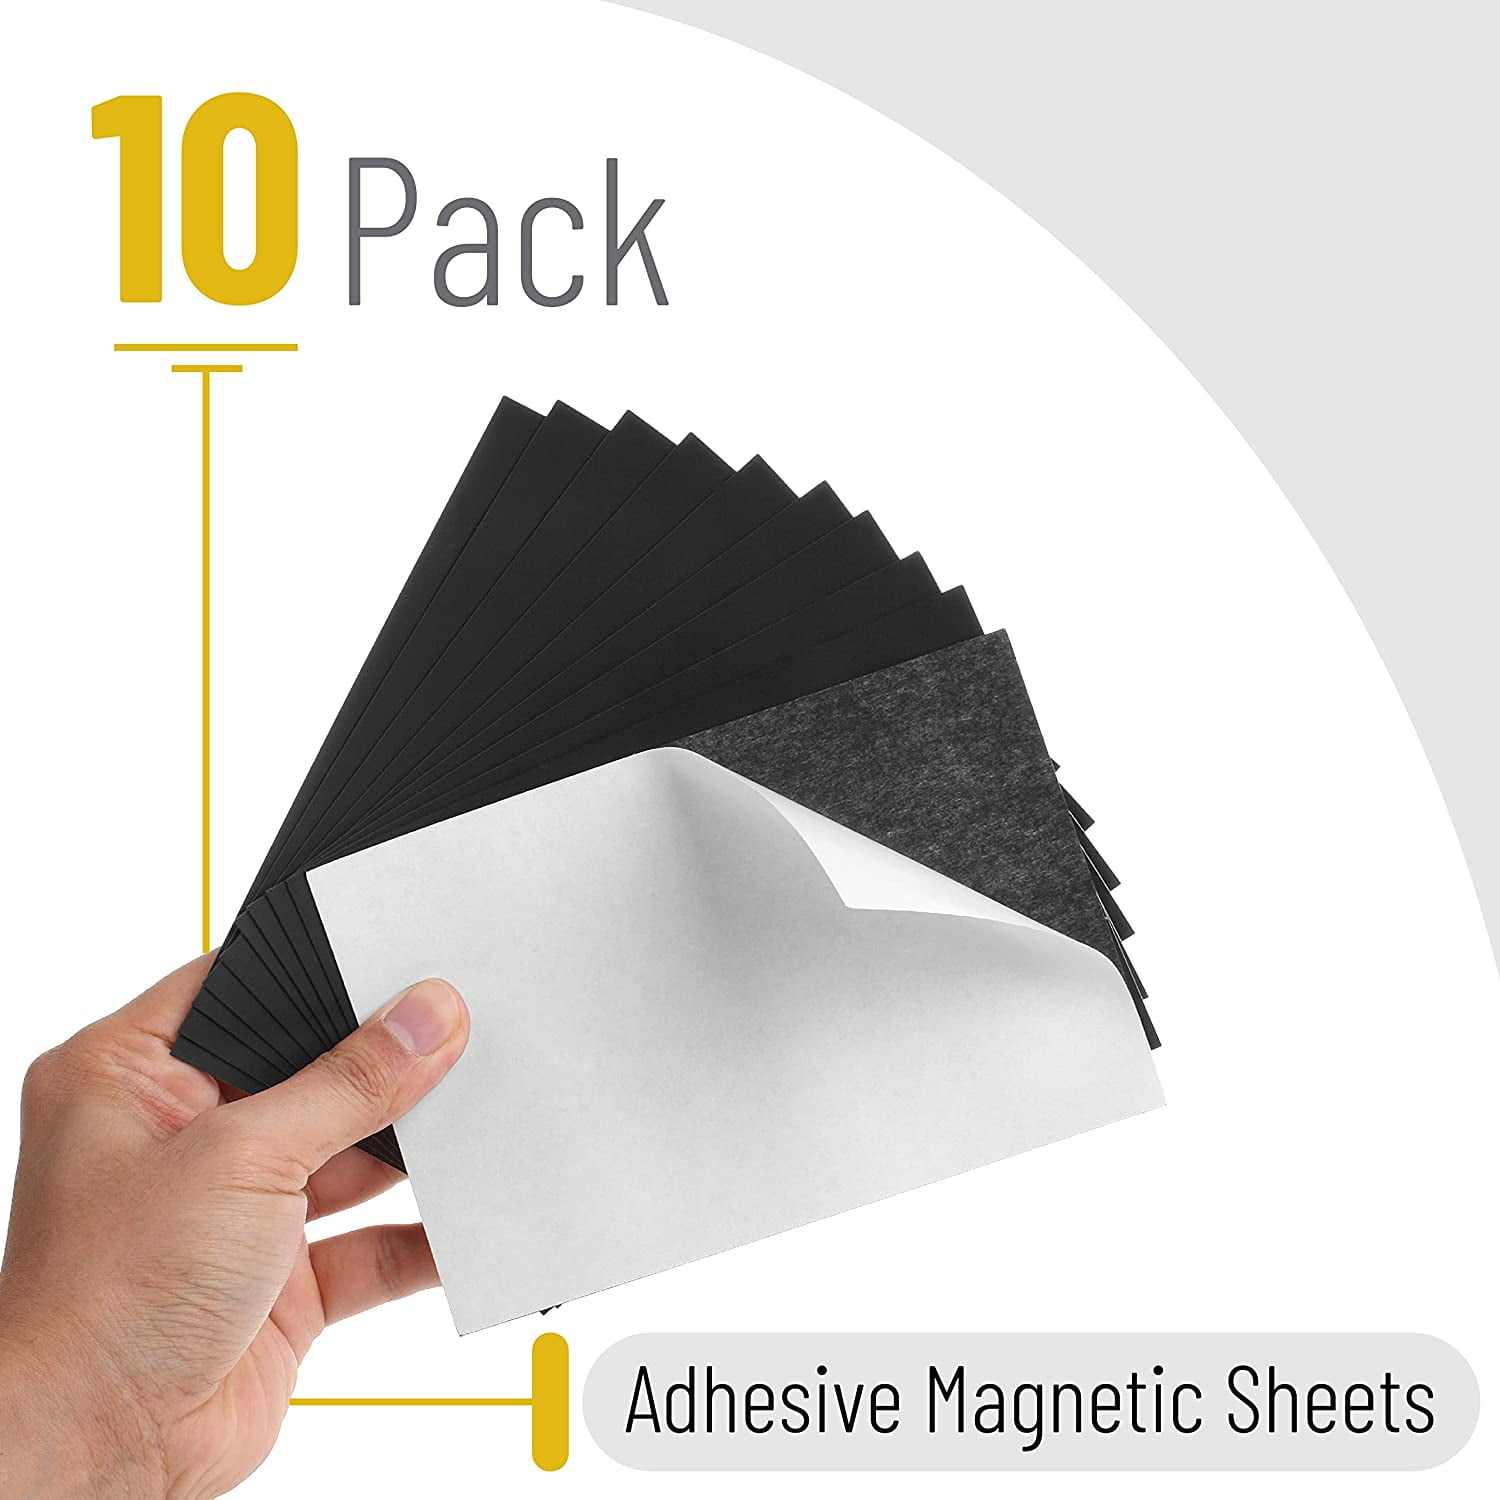  Yahenda 40 Sheets Adhesive Magnetic Sheets 4 x 6 Inch Cuttable  Magnets for Crafts Easy Peel and Stick Flexible Magnetic Paper with Self  Adhesive Backing for Photos Picture Stamp Metal Die